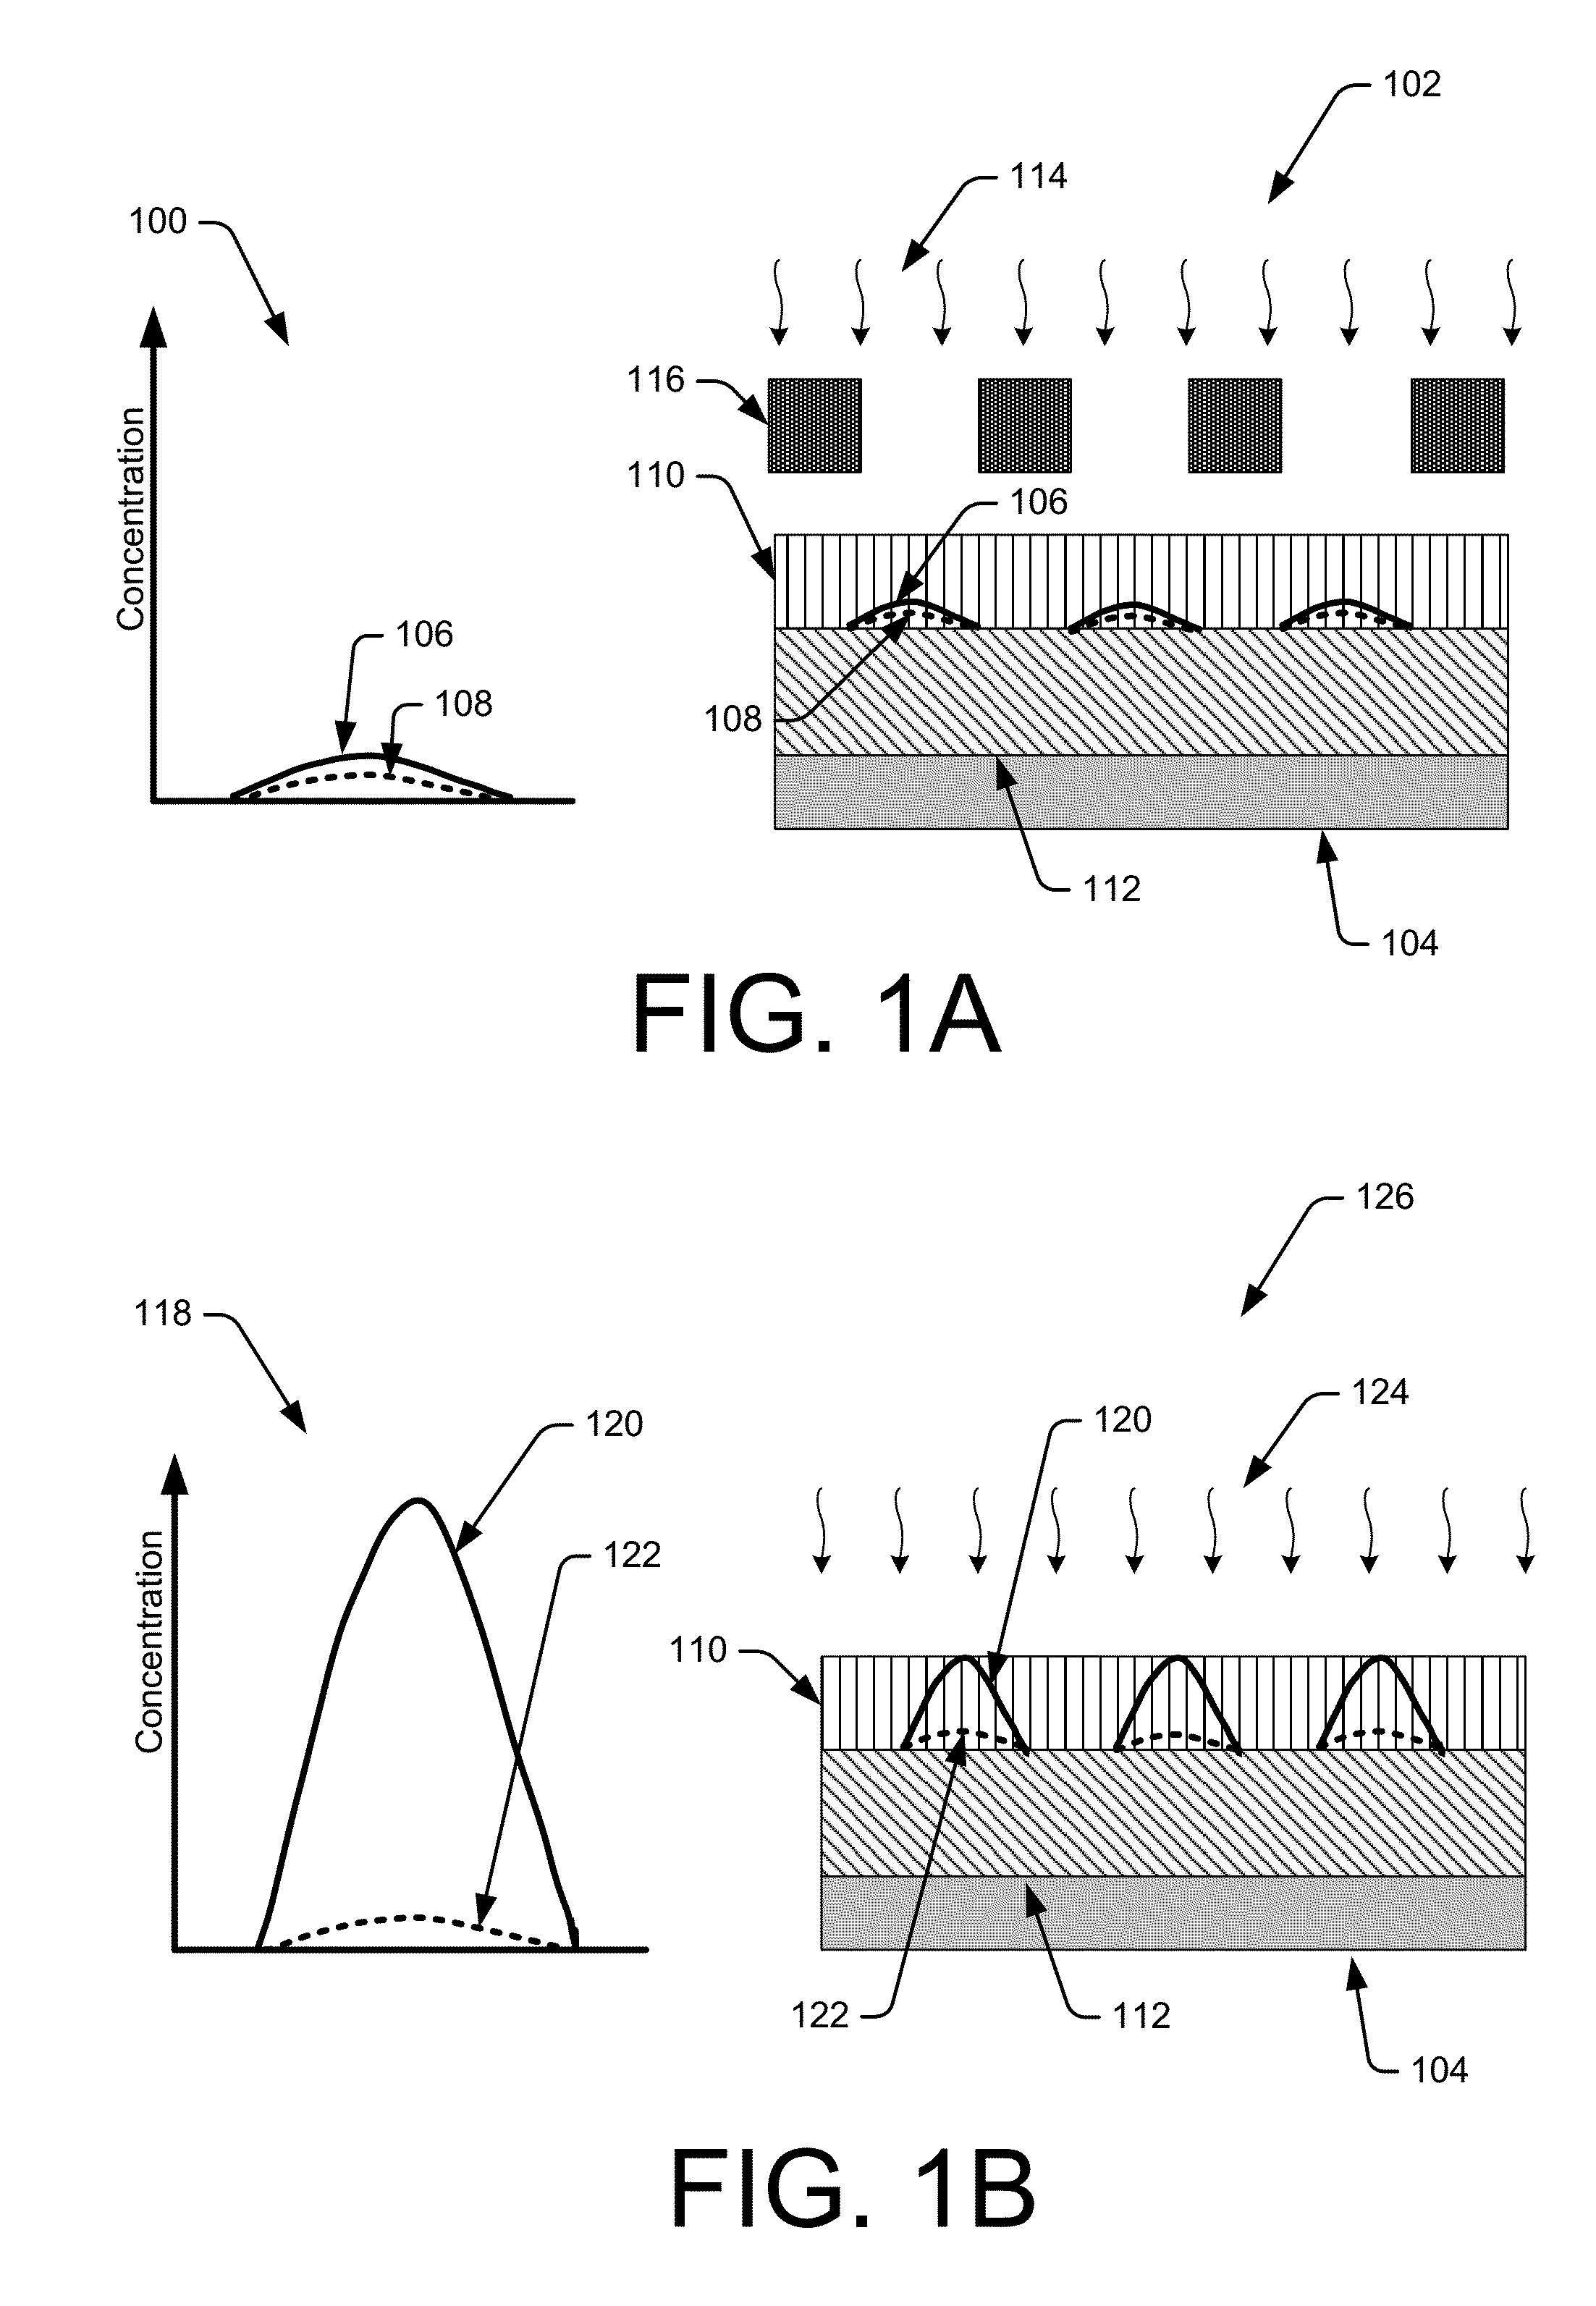 Methods and Techniques to use with Photosensitized Chemically Amplified Resist Chemicals and Processes